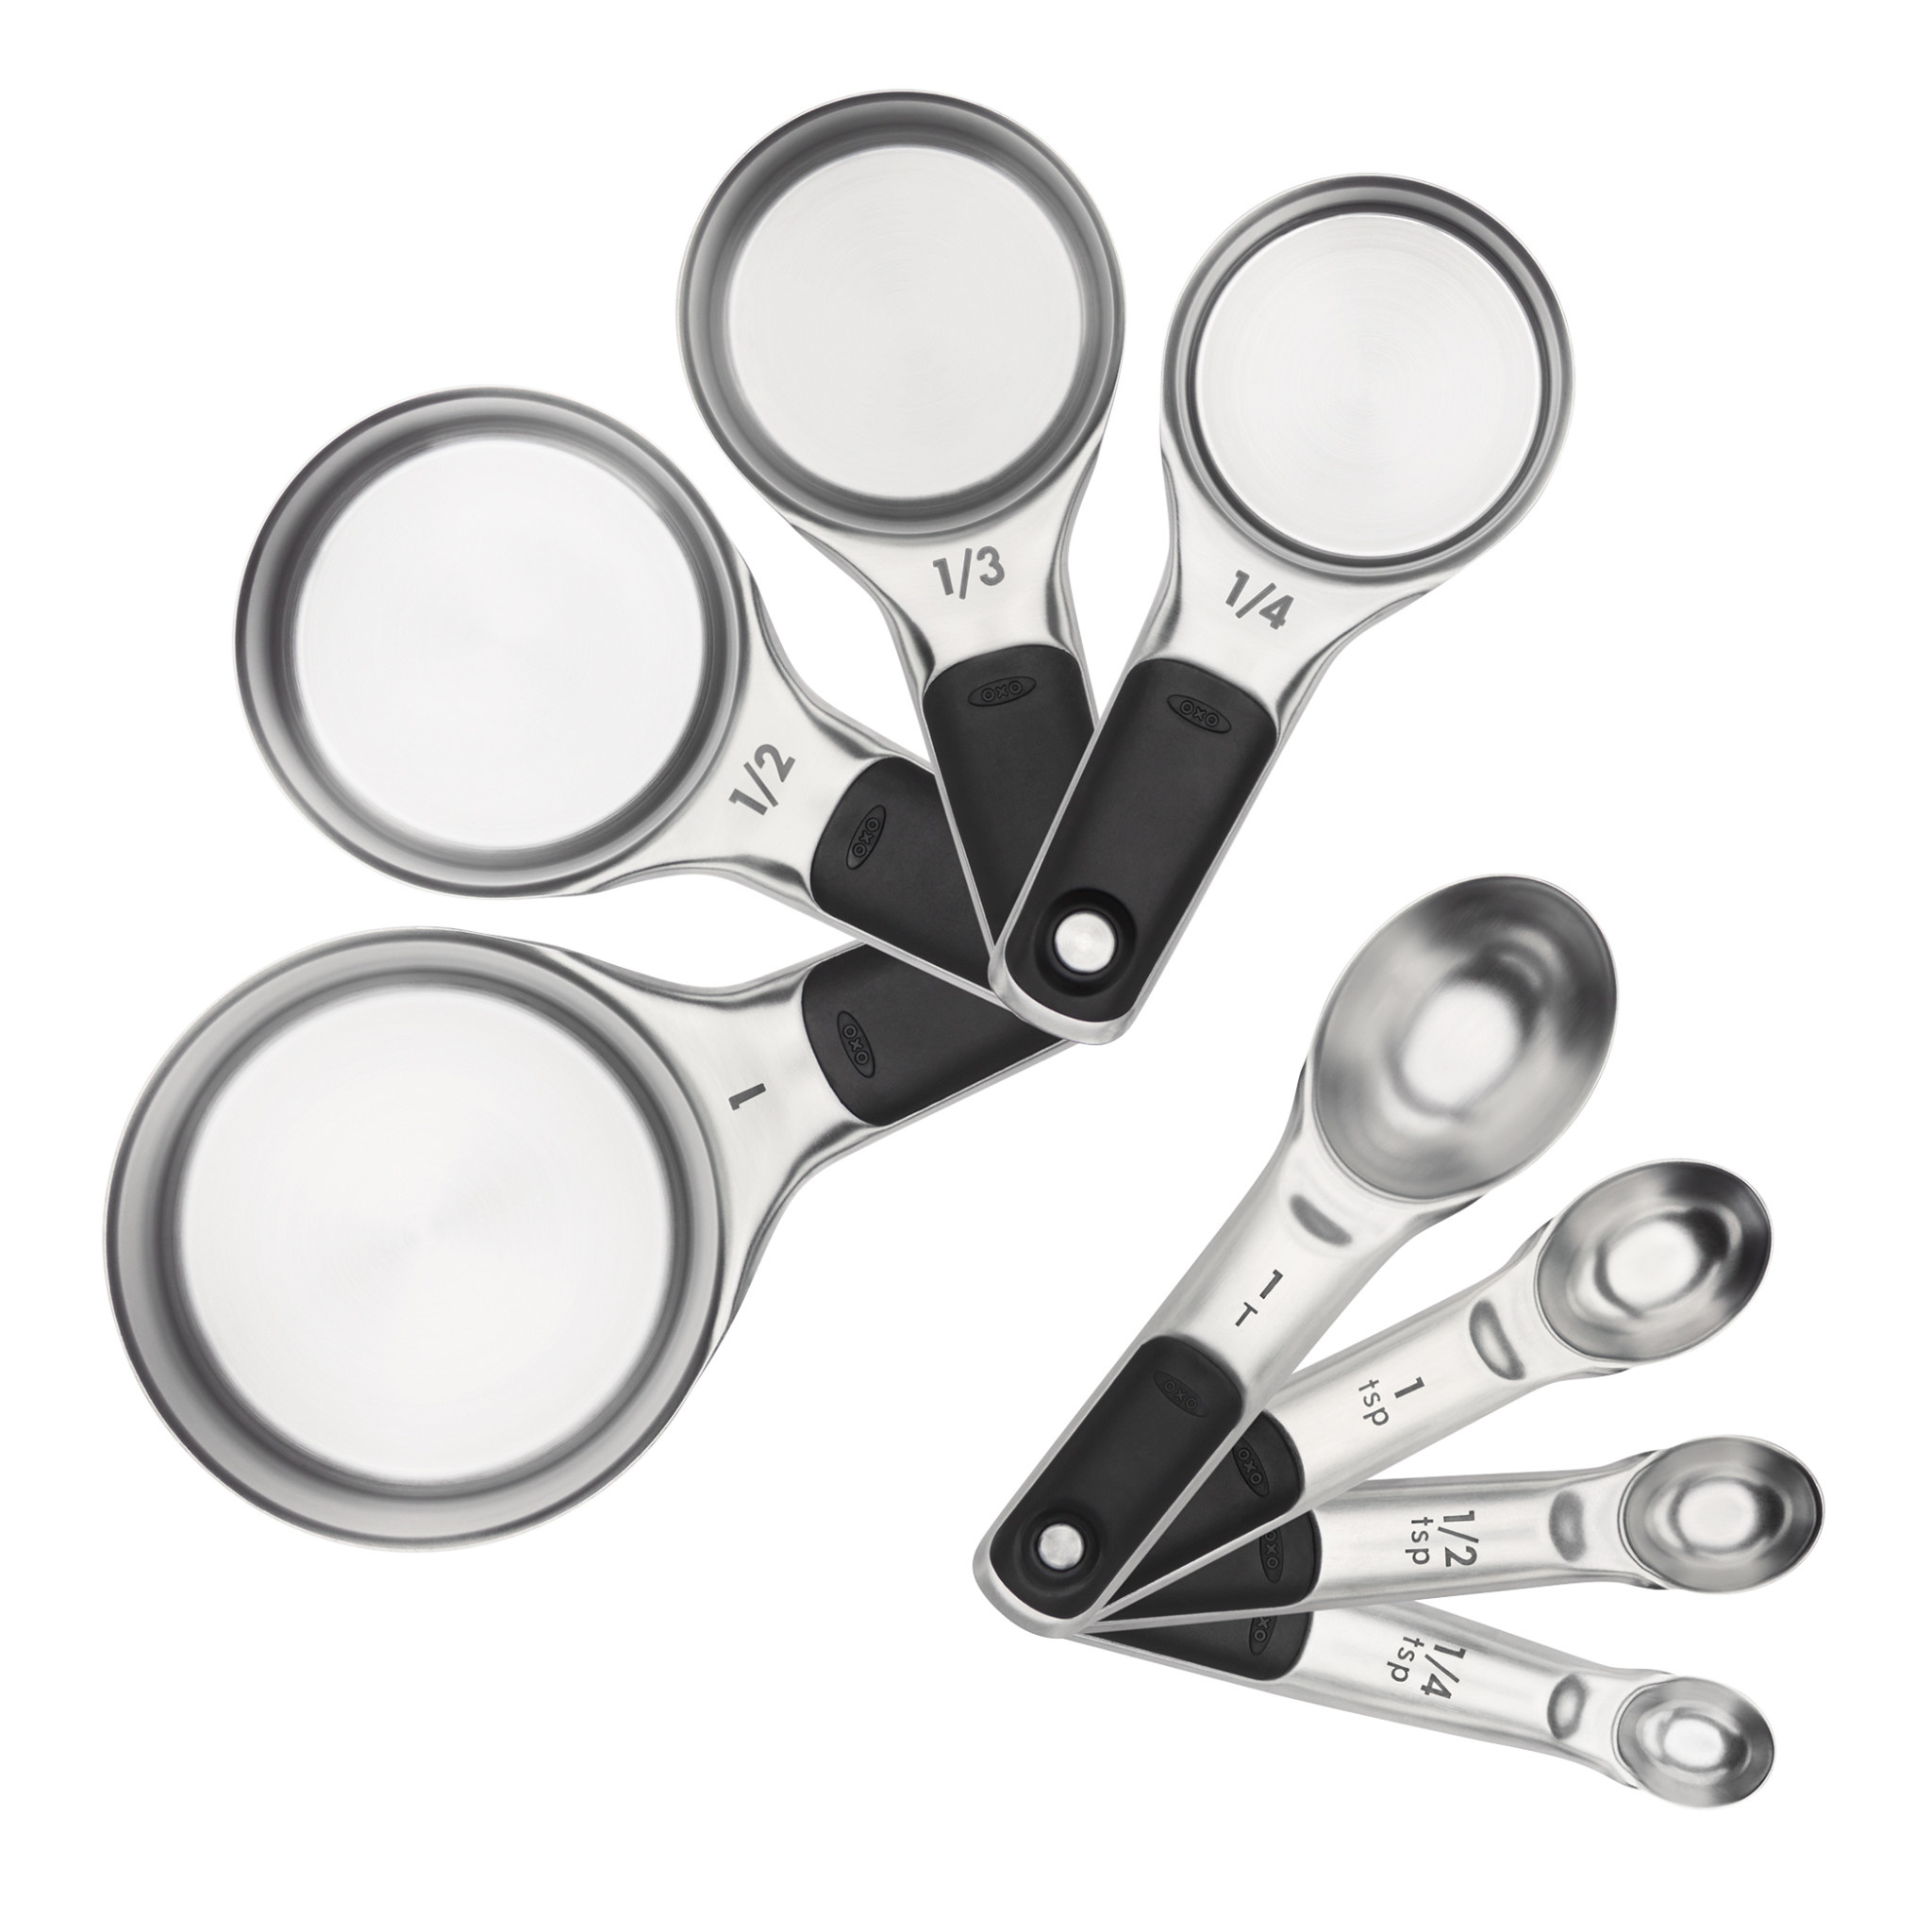 S/S Measuring Cup and Spoon Set - Creative Kitchen Fargo